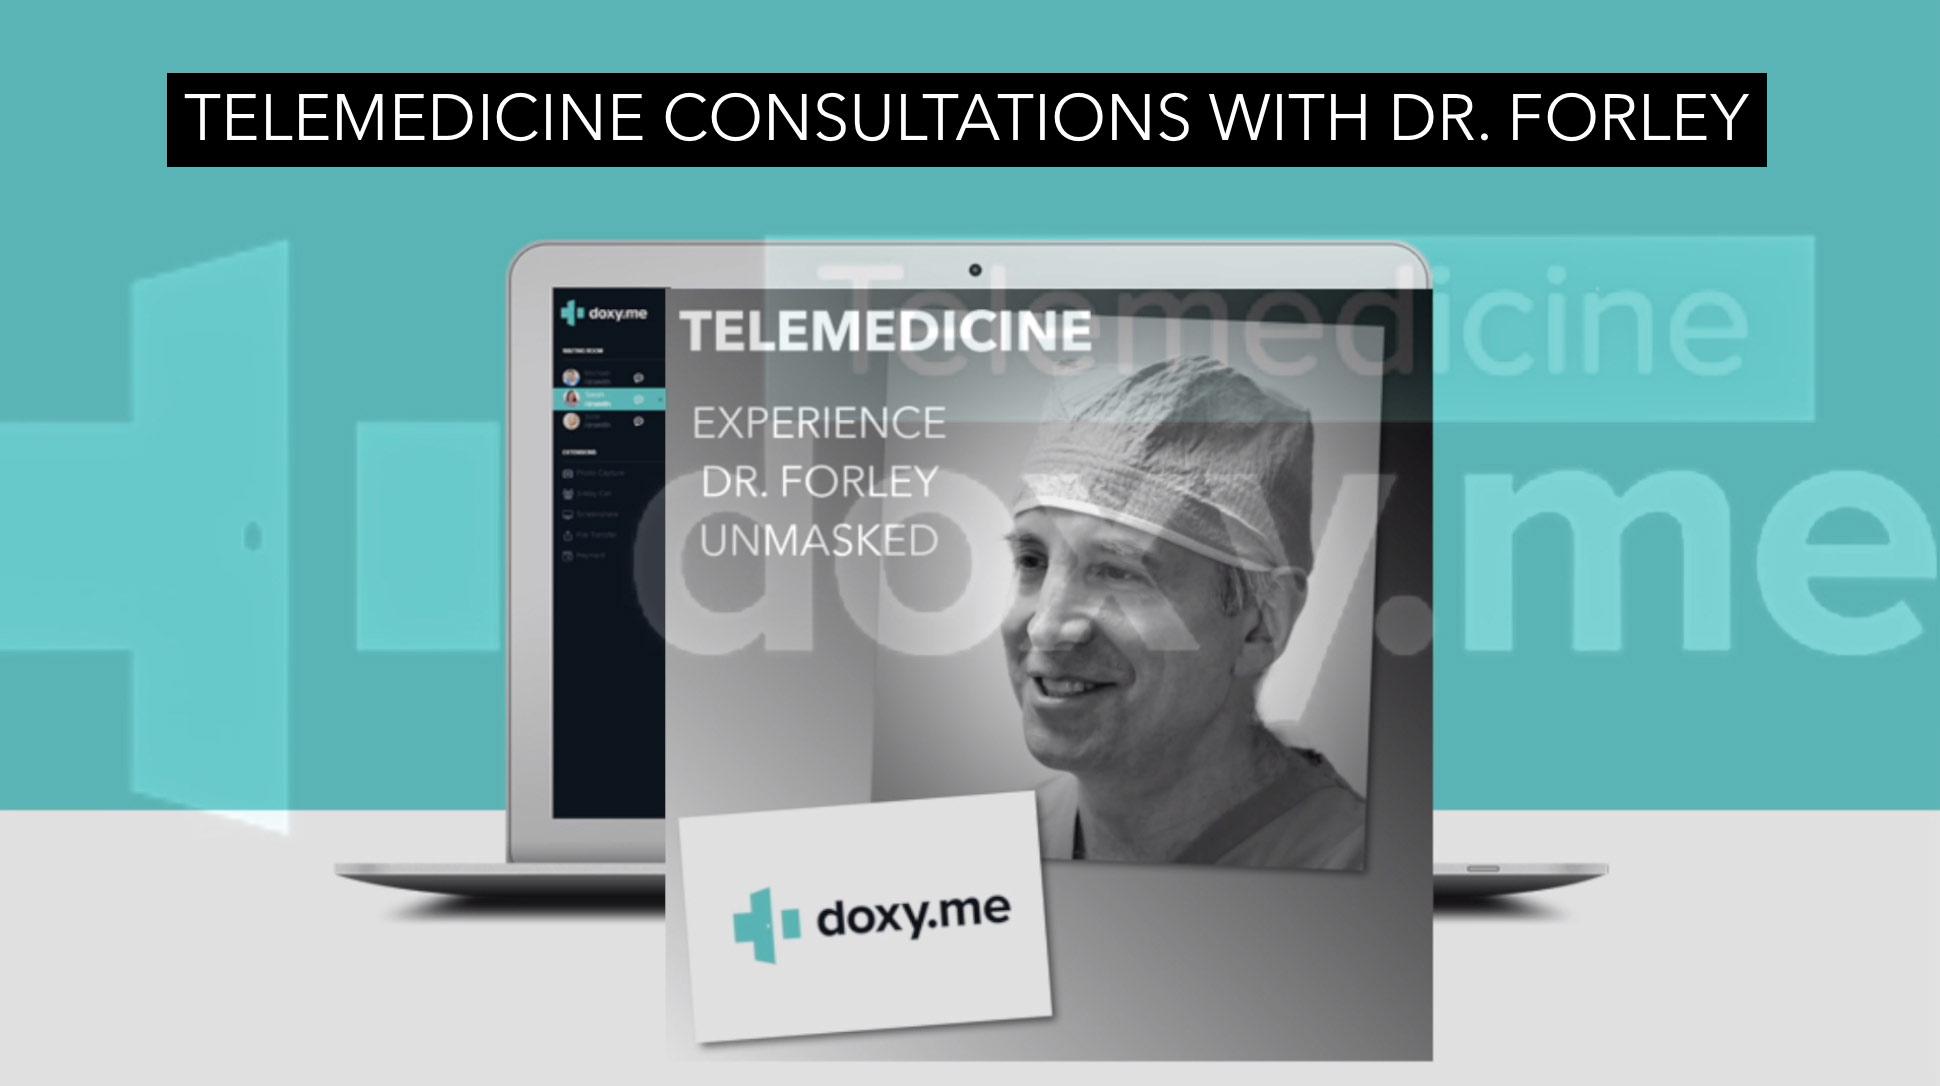 Watch Video: Telemedicine Consultations with Dr. Forley in NYC